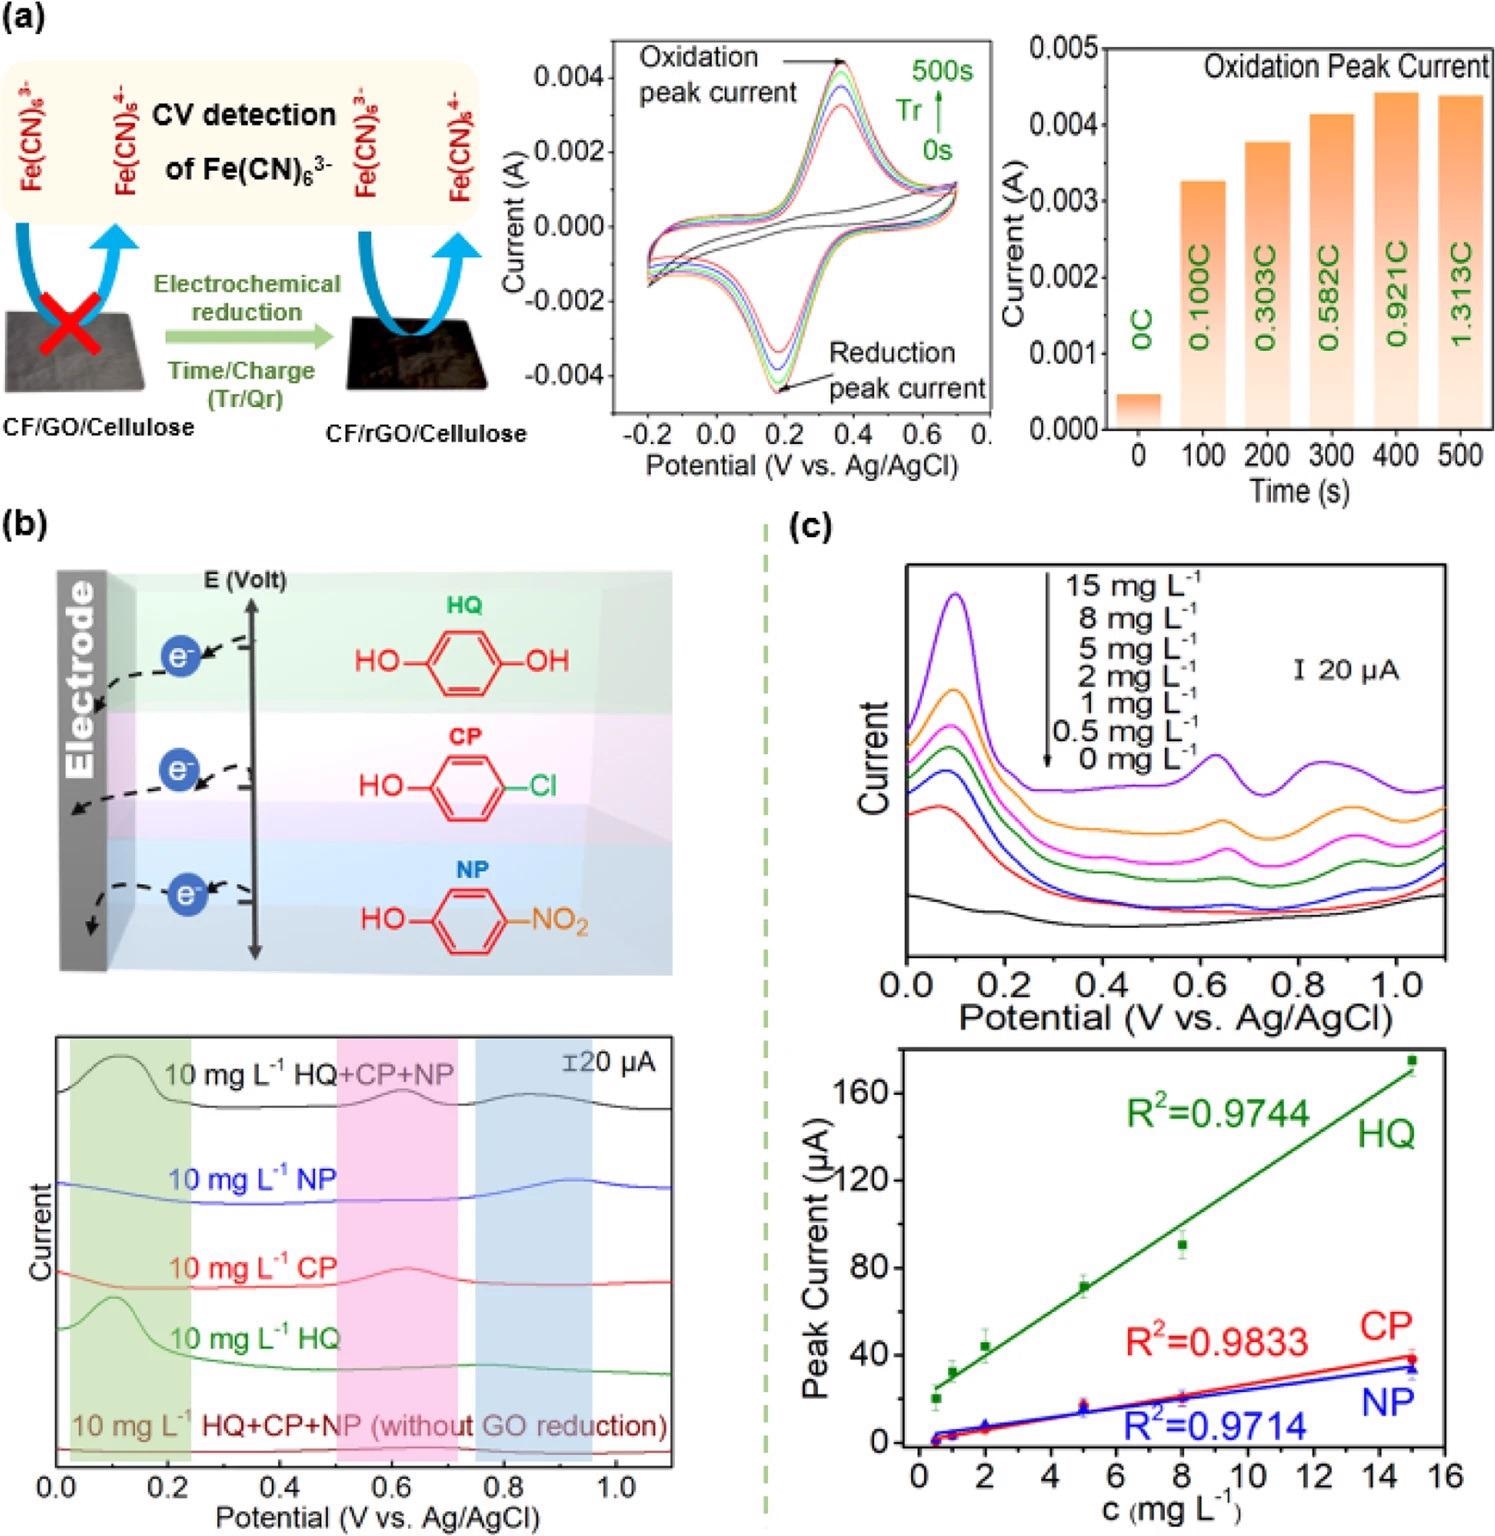 Electrochemical detection by composite paper. (a) Electrocatalytic activities. Electrochemical reduction of CF/GO/cellulose confers electrocatalytic activity to the composite [as measured by CV measurements of Fe(CN)63-]. Differential pulse voltammetry (DPV) measurements with three phenols (hydroquinone, chlorophenol, and nitrophenol) illustrate that the electrocatalytic properties enhance (b) selectivity of electrochemical sensing. Detection selectivity (DPV-peak separation) and (c) sensitivity of electrochemical sensing. Detection sensitivity (peak amplification; error bars show the standard deviation from three measurements and are generally small relative to symbol size).